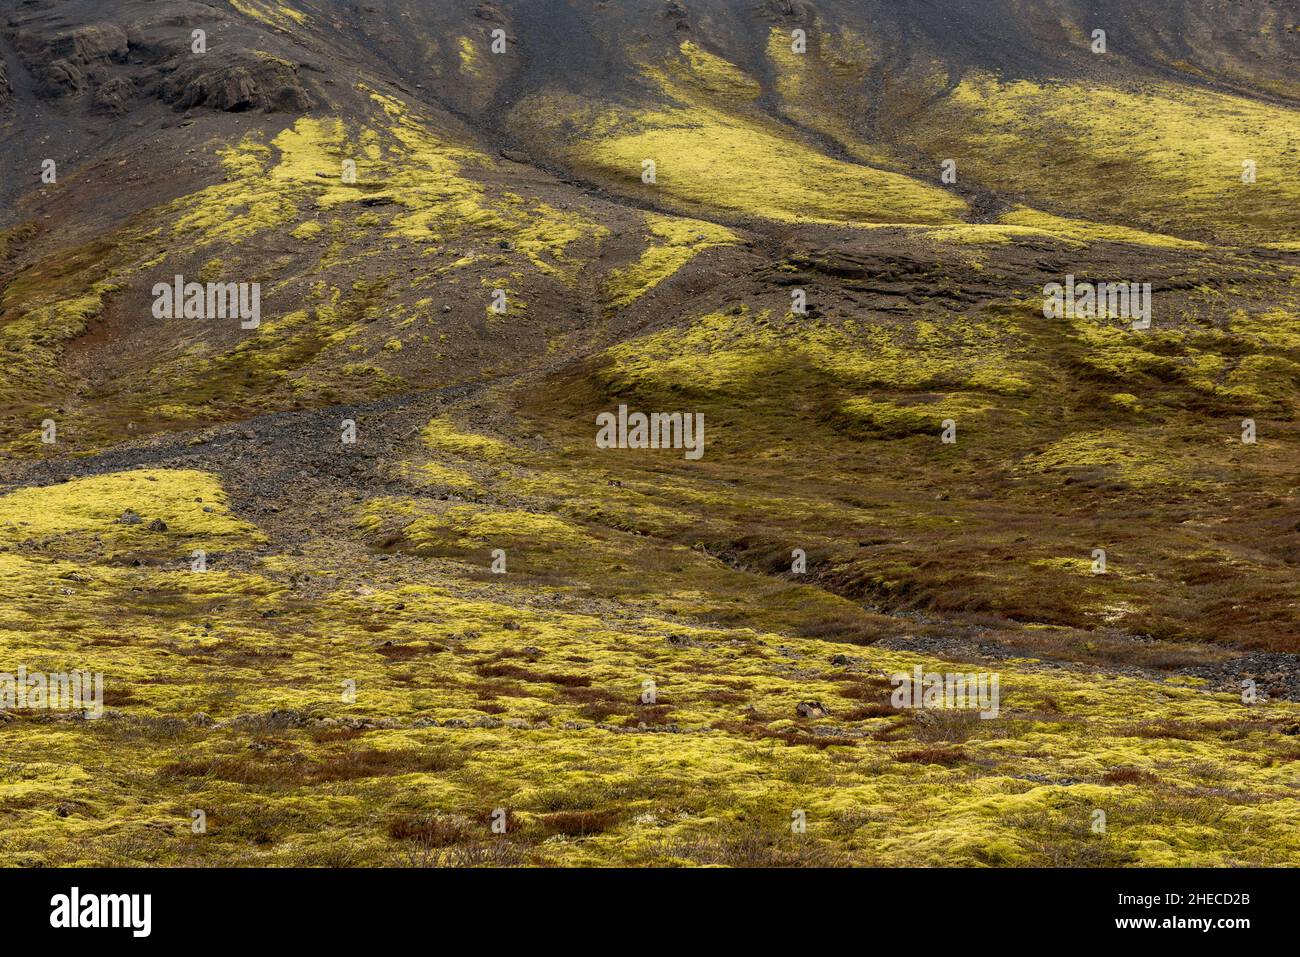 Volcanic landscape in Iceland. Lava flows covered with green moss Stock Photo